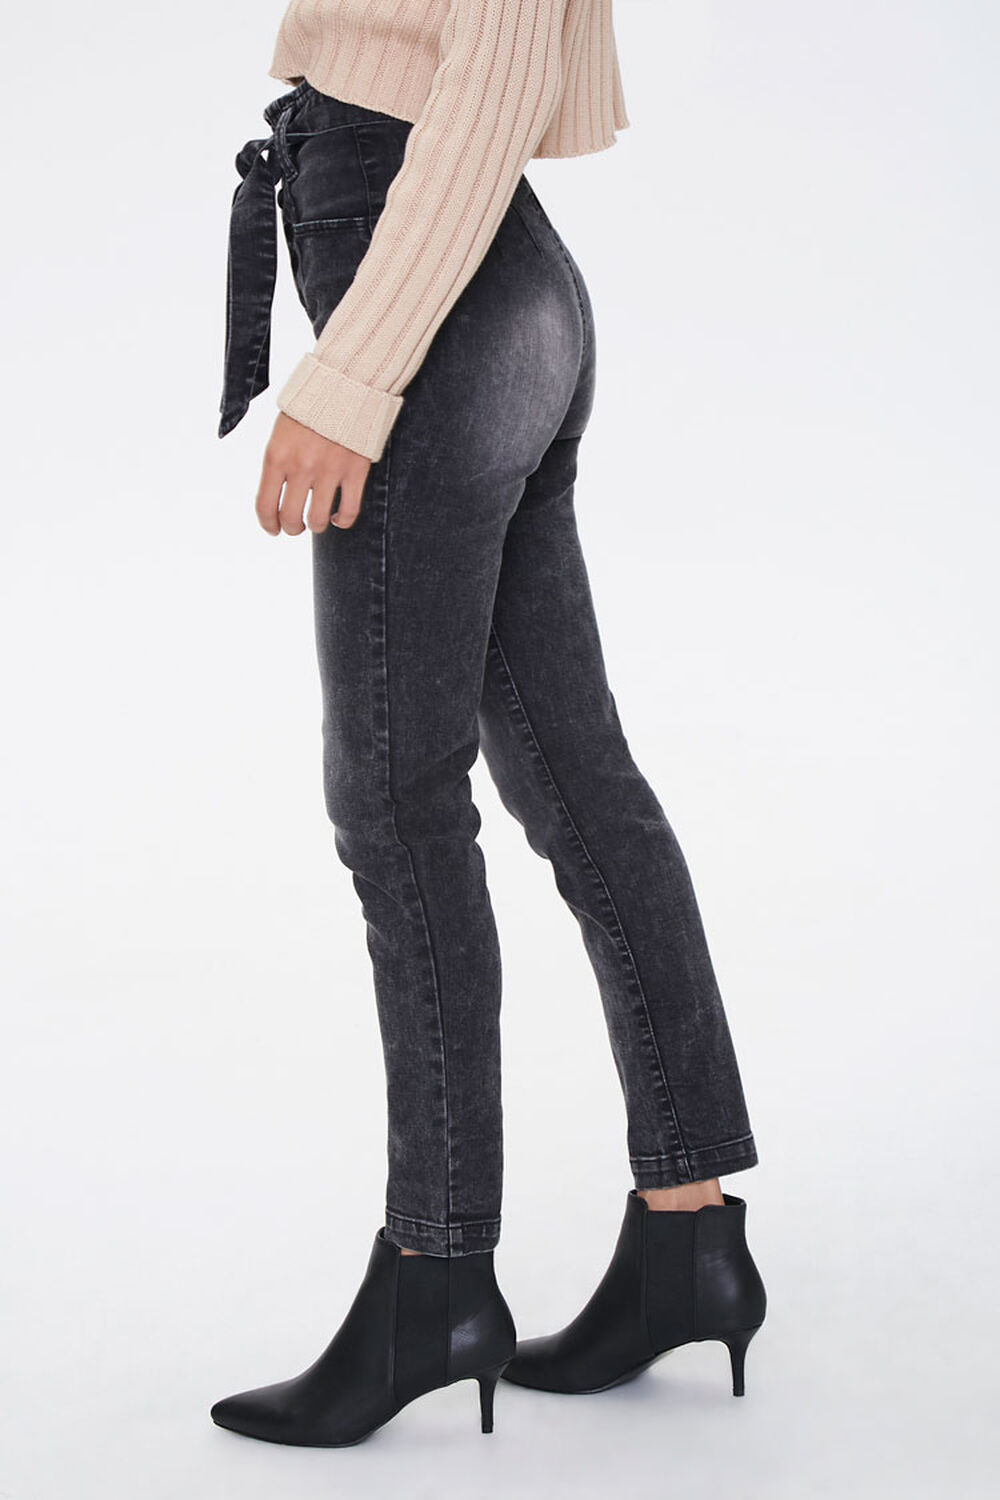 BLACK Belted High-Rise Jeans, image 2